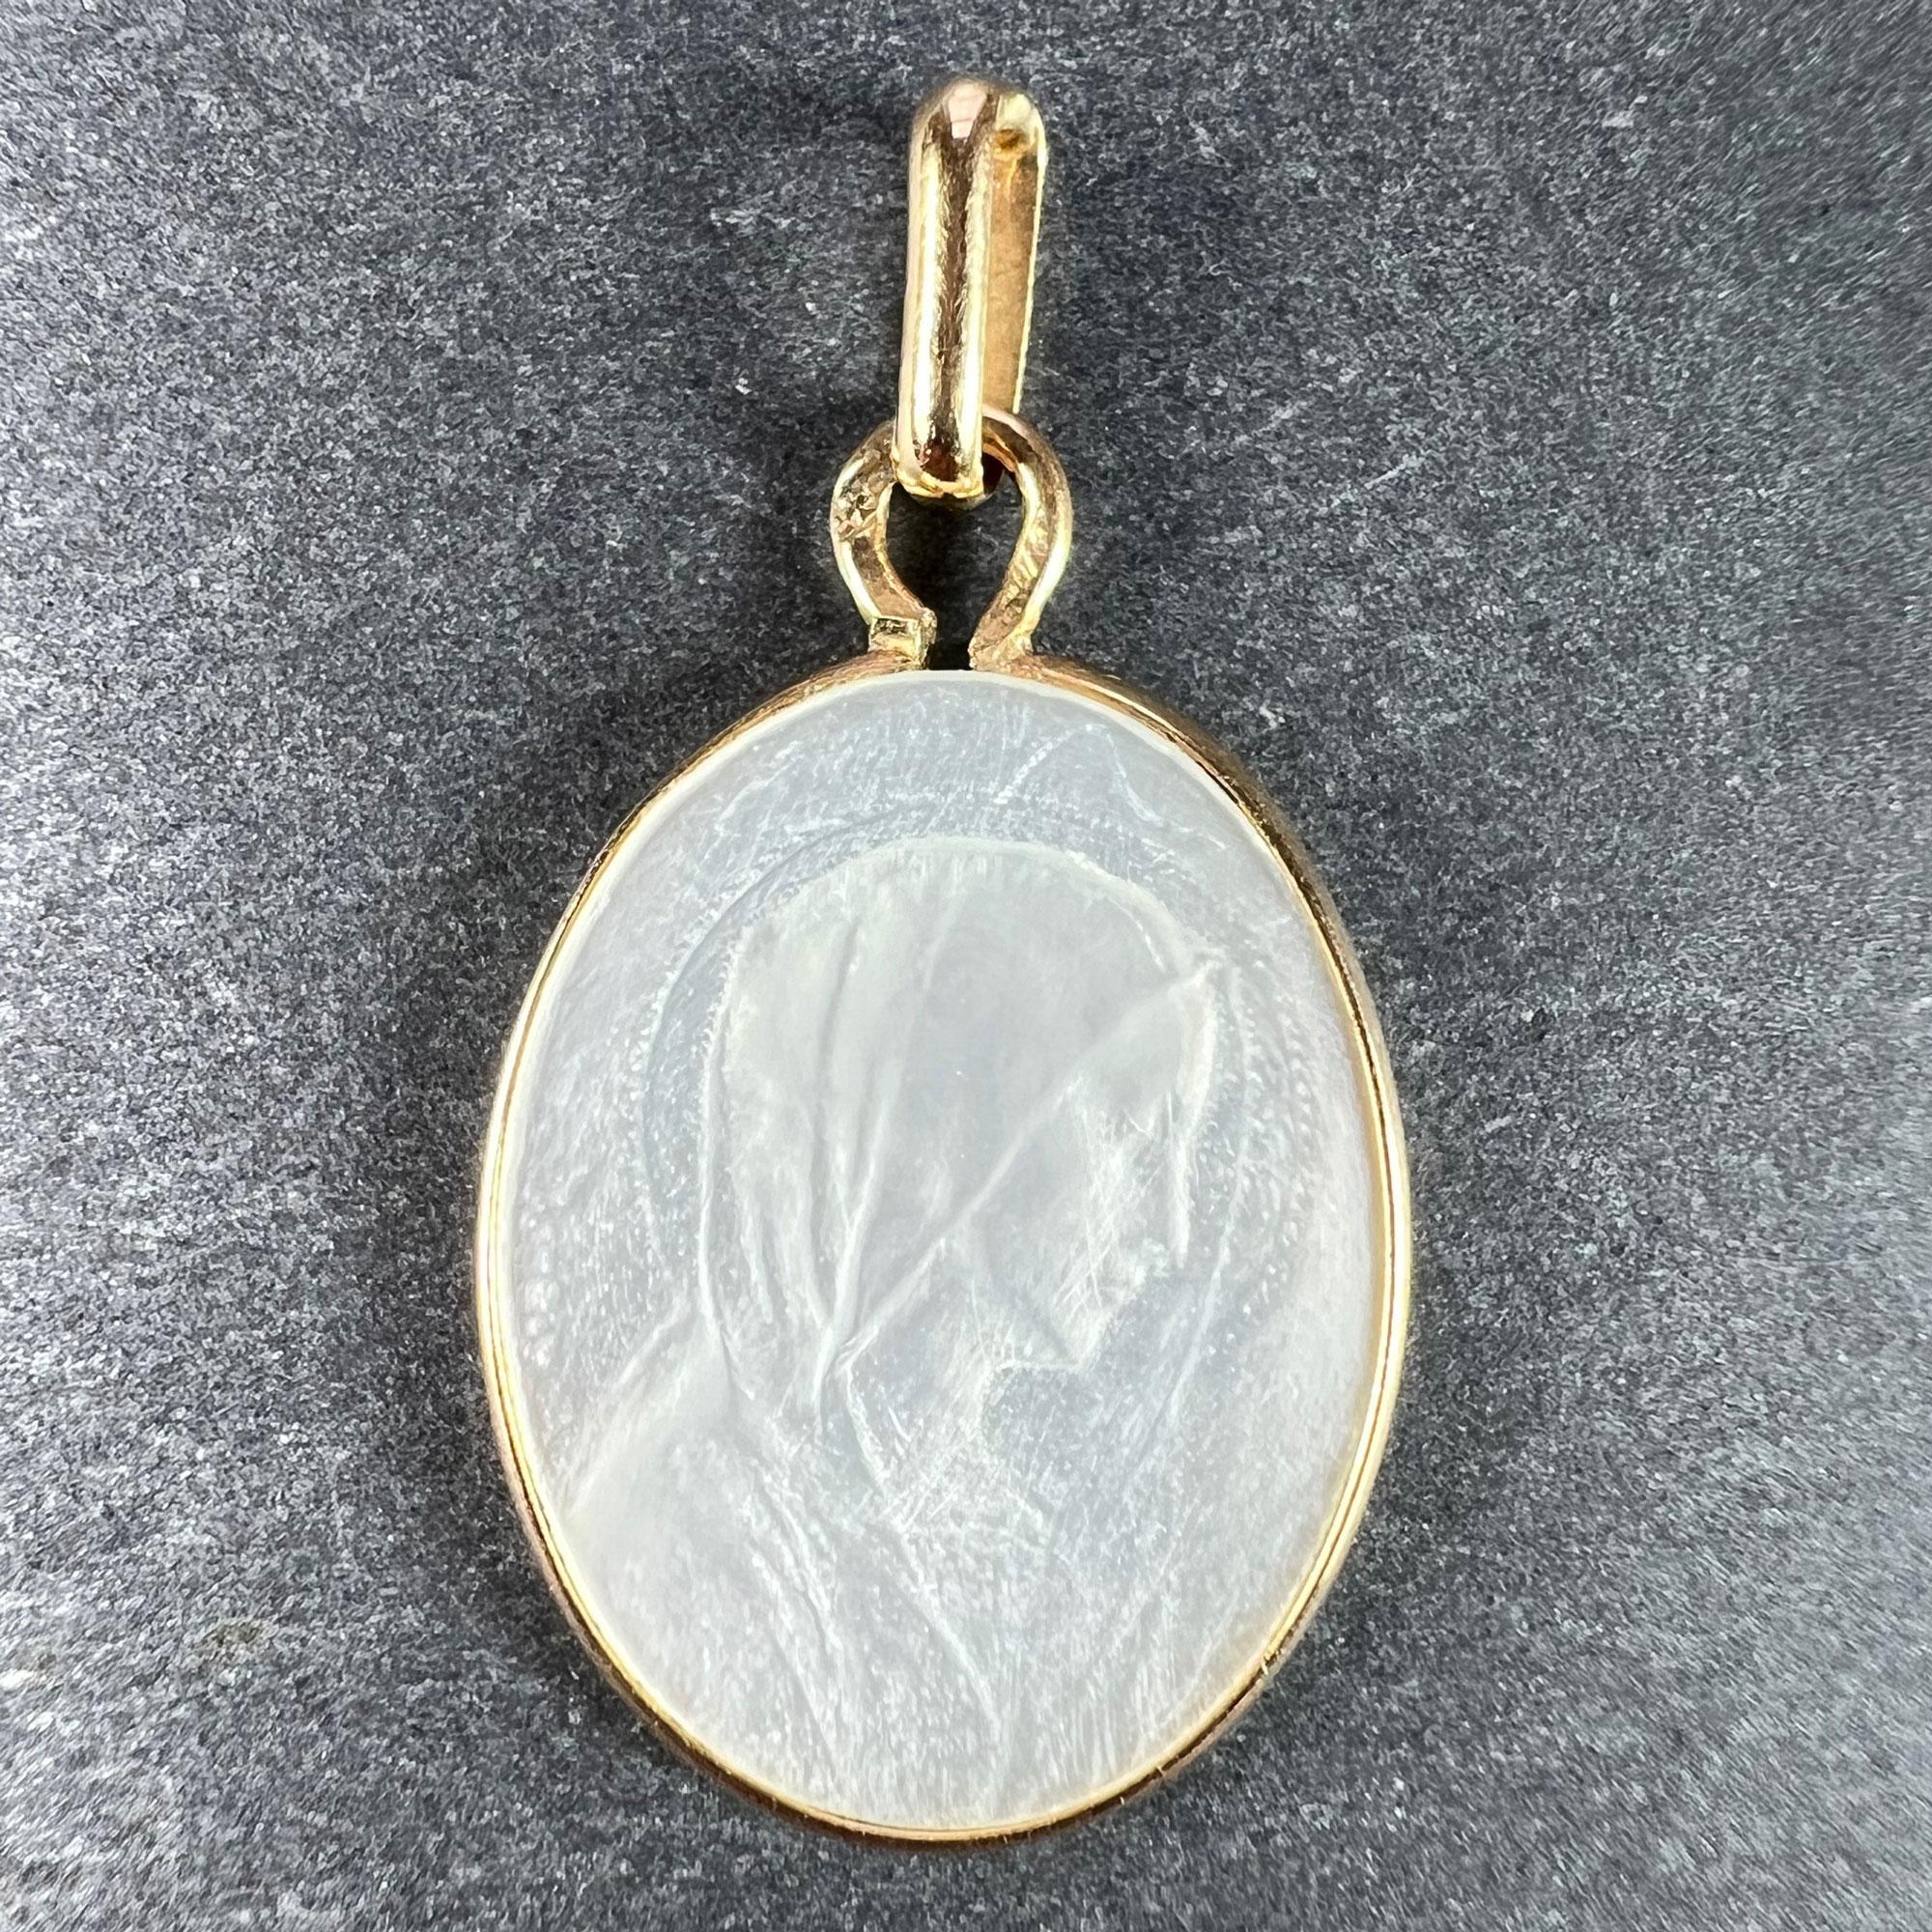 An 18 karat (18K) yellow gold charm pendant set with mother of pearl depicting the Virgin Mary in profile. Stamped with the eagle mark for 18 karat gold and French manufacture along with an unknown maker's mark.
 
Dimensions: 2.2 x 1.4 x 0.15 cm